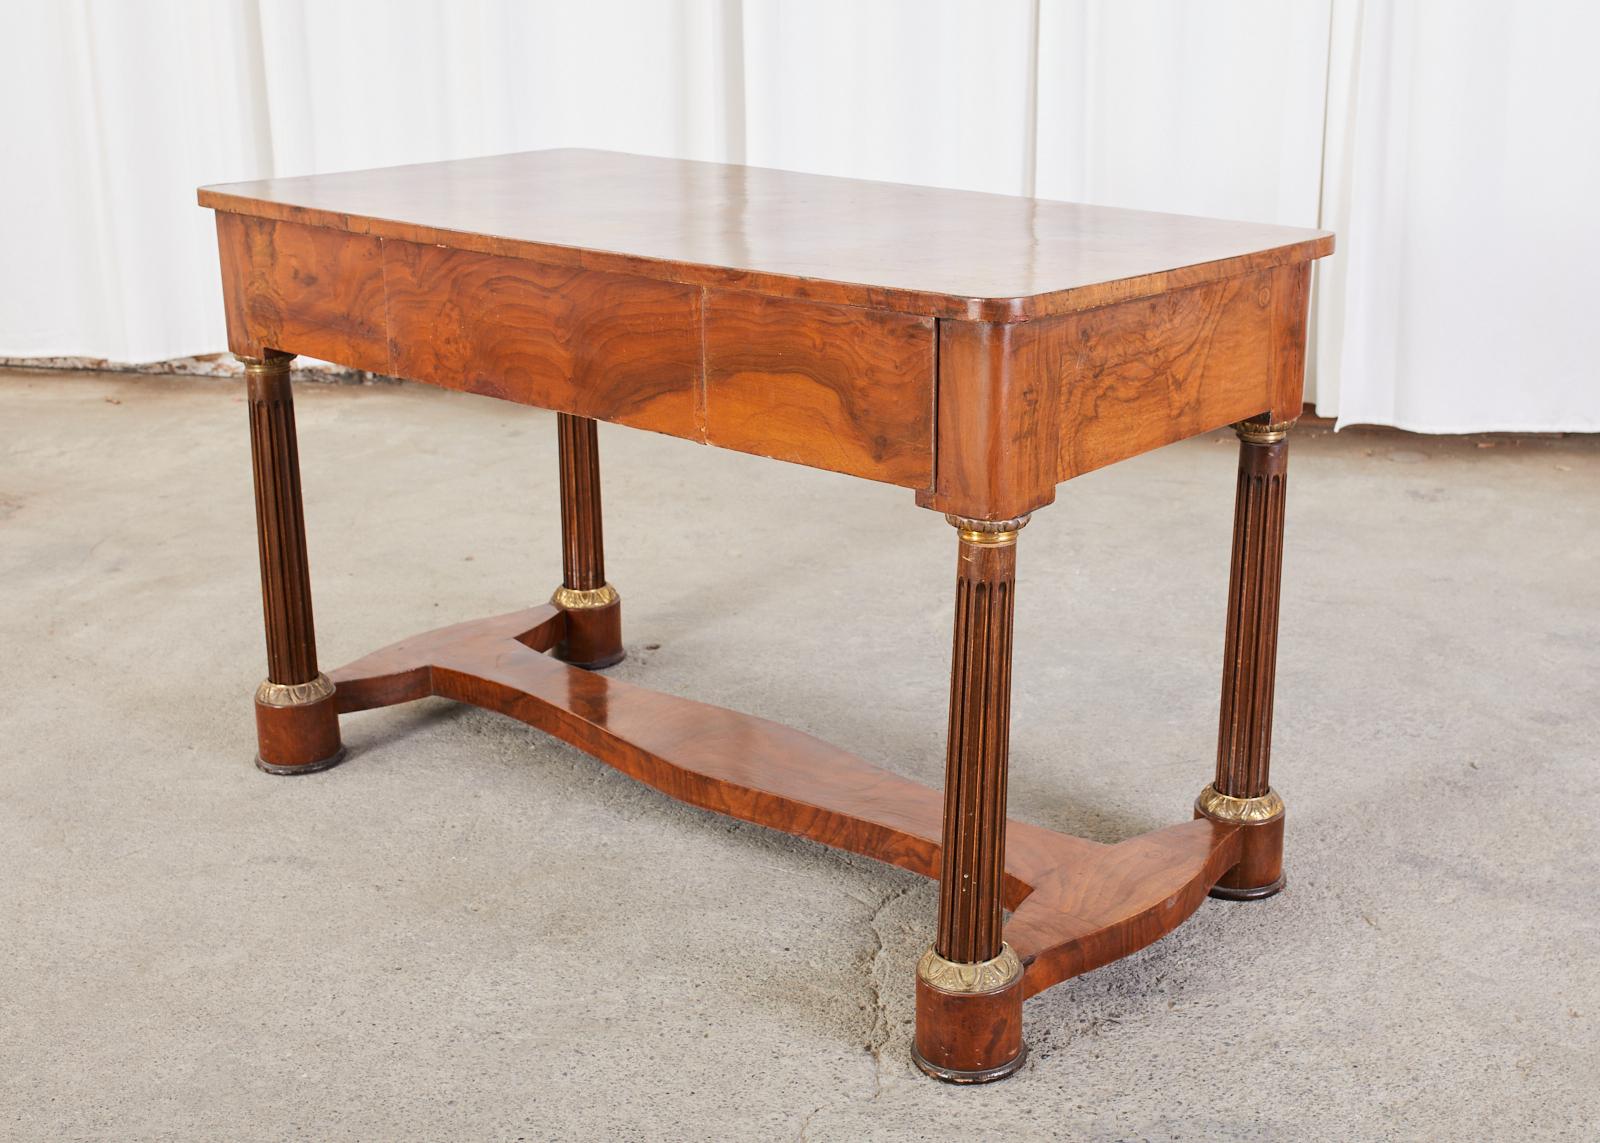 Hand-Crafted French Empire Bronze Mounted Walnut Library Table Desk